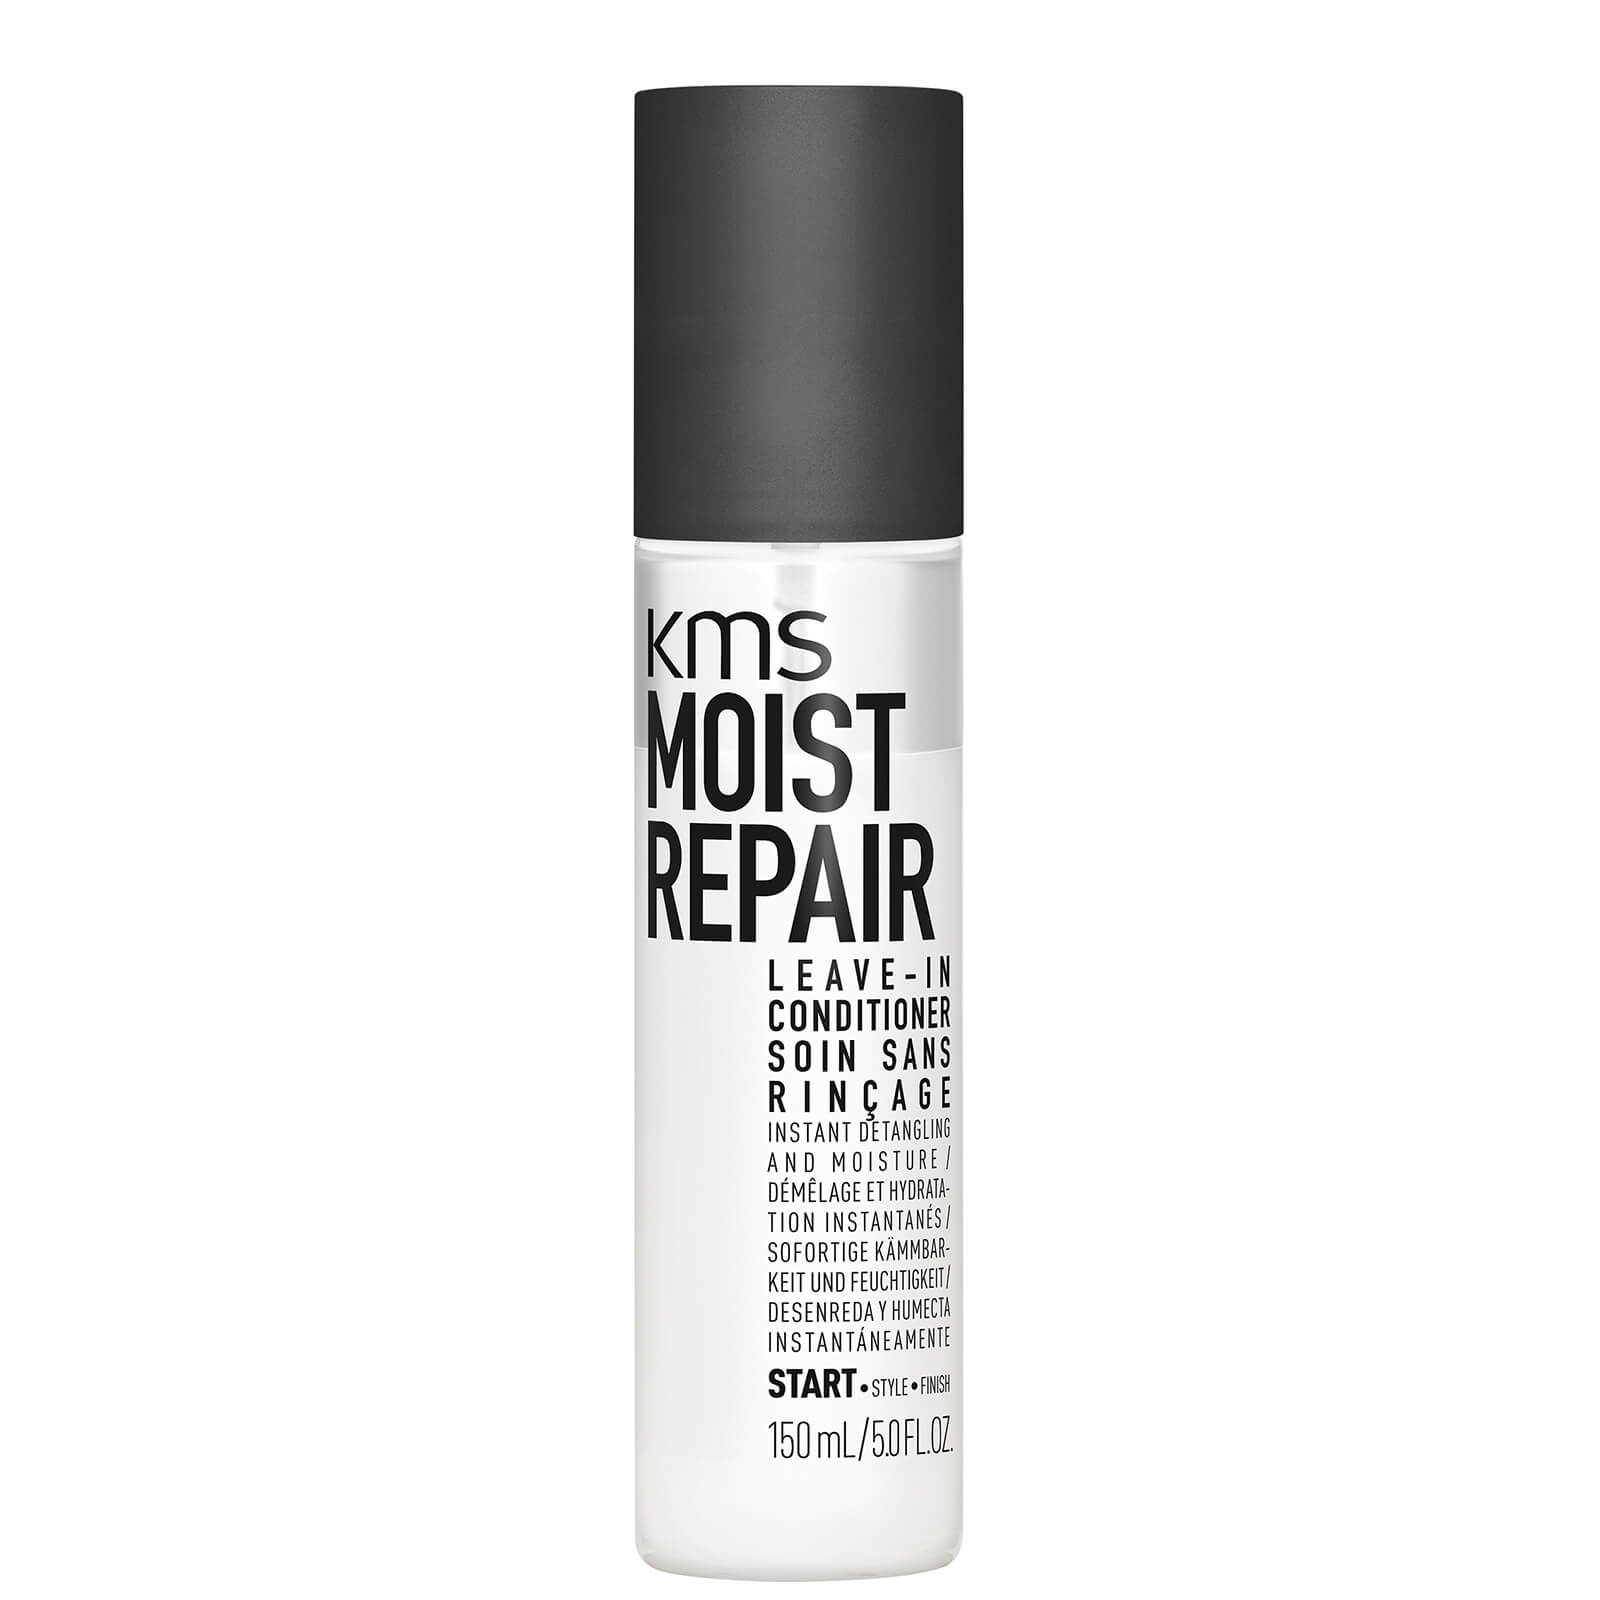 Image of KMS Moist Repair Leave-In Conditioner 150ml